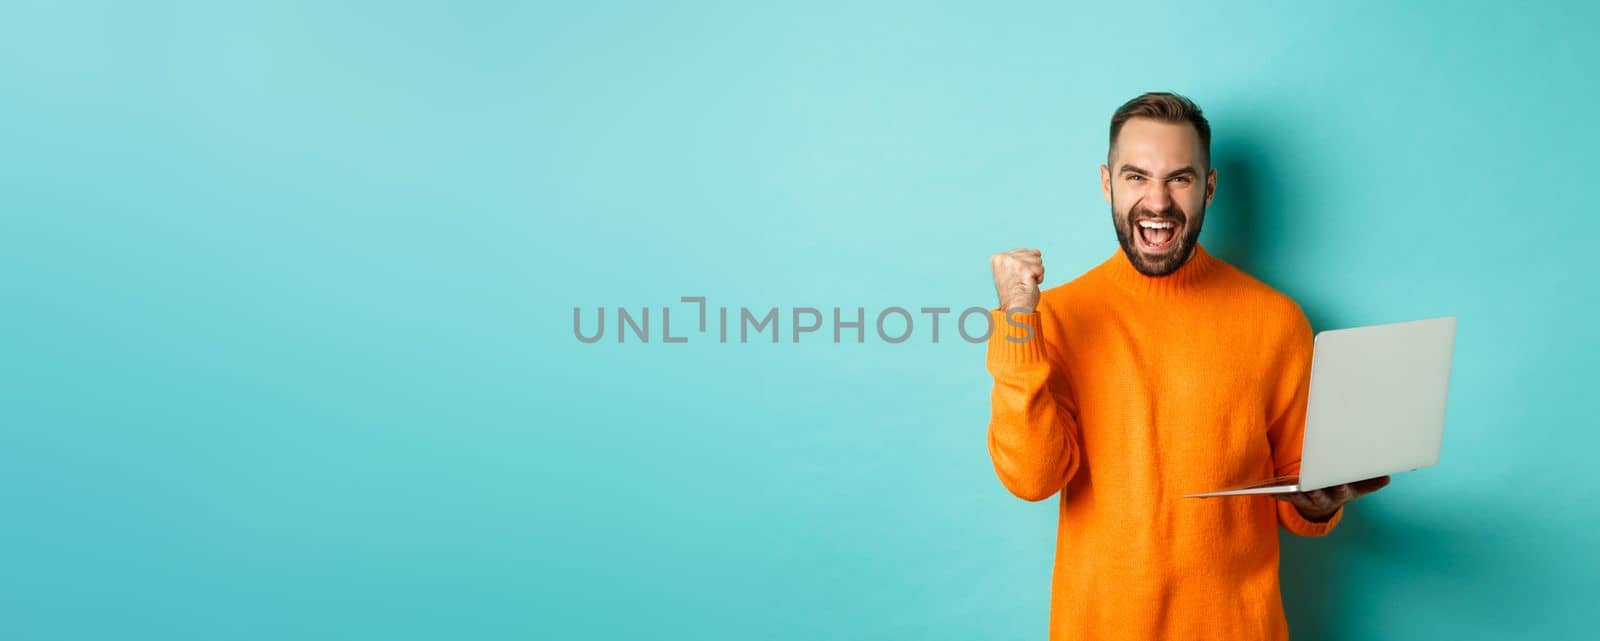 Freelance and technology concept. Lucky man winner celebrating, winning online, showing fist pump and holding laptop, standing over light blue background.